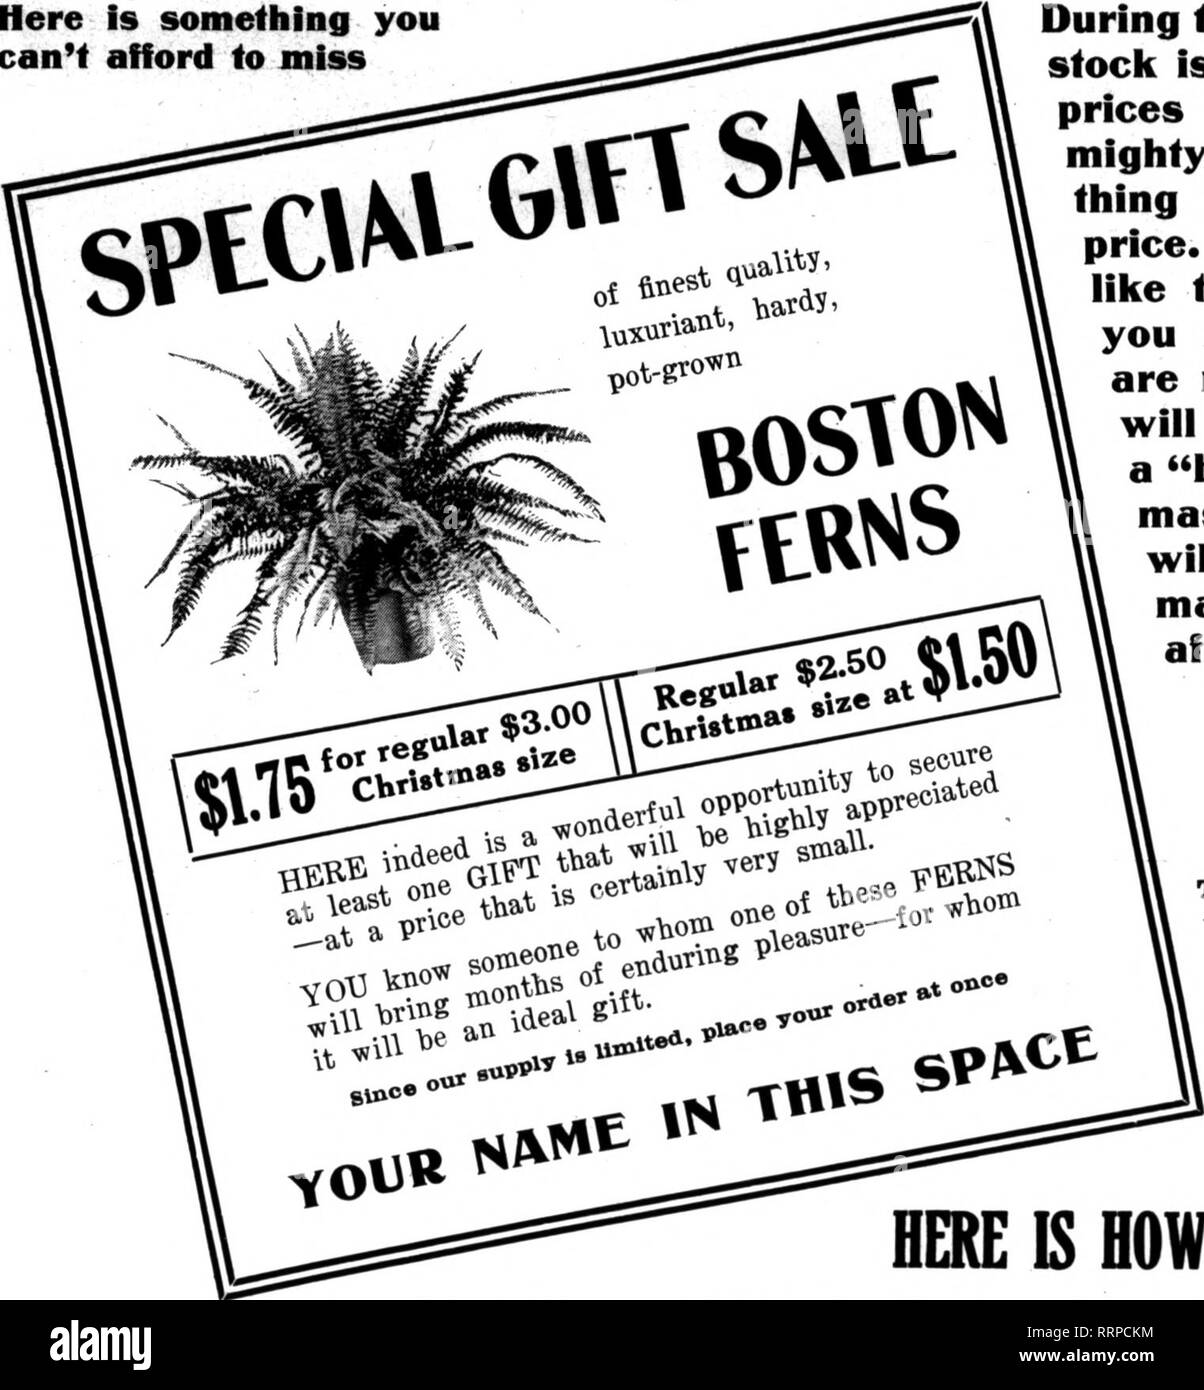 Florists' review [microform]. Floriculture. Dxc&gt;ifB&gt;R '^16, 191B. The  Florists'Revkw 87 Feature Boston Ferns for Xnnas (WITTBOLD WILL CO-OPERATE  WITH YOU) Here is something you can't afford to miss. During tiie holidays, wiien